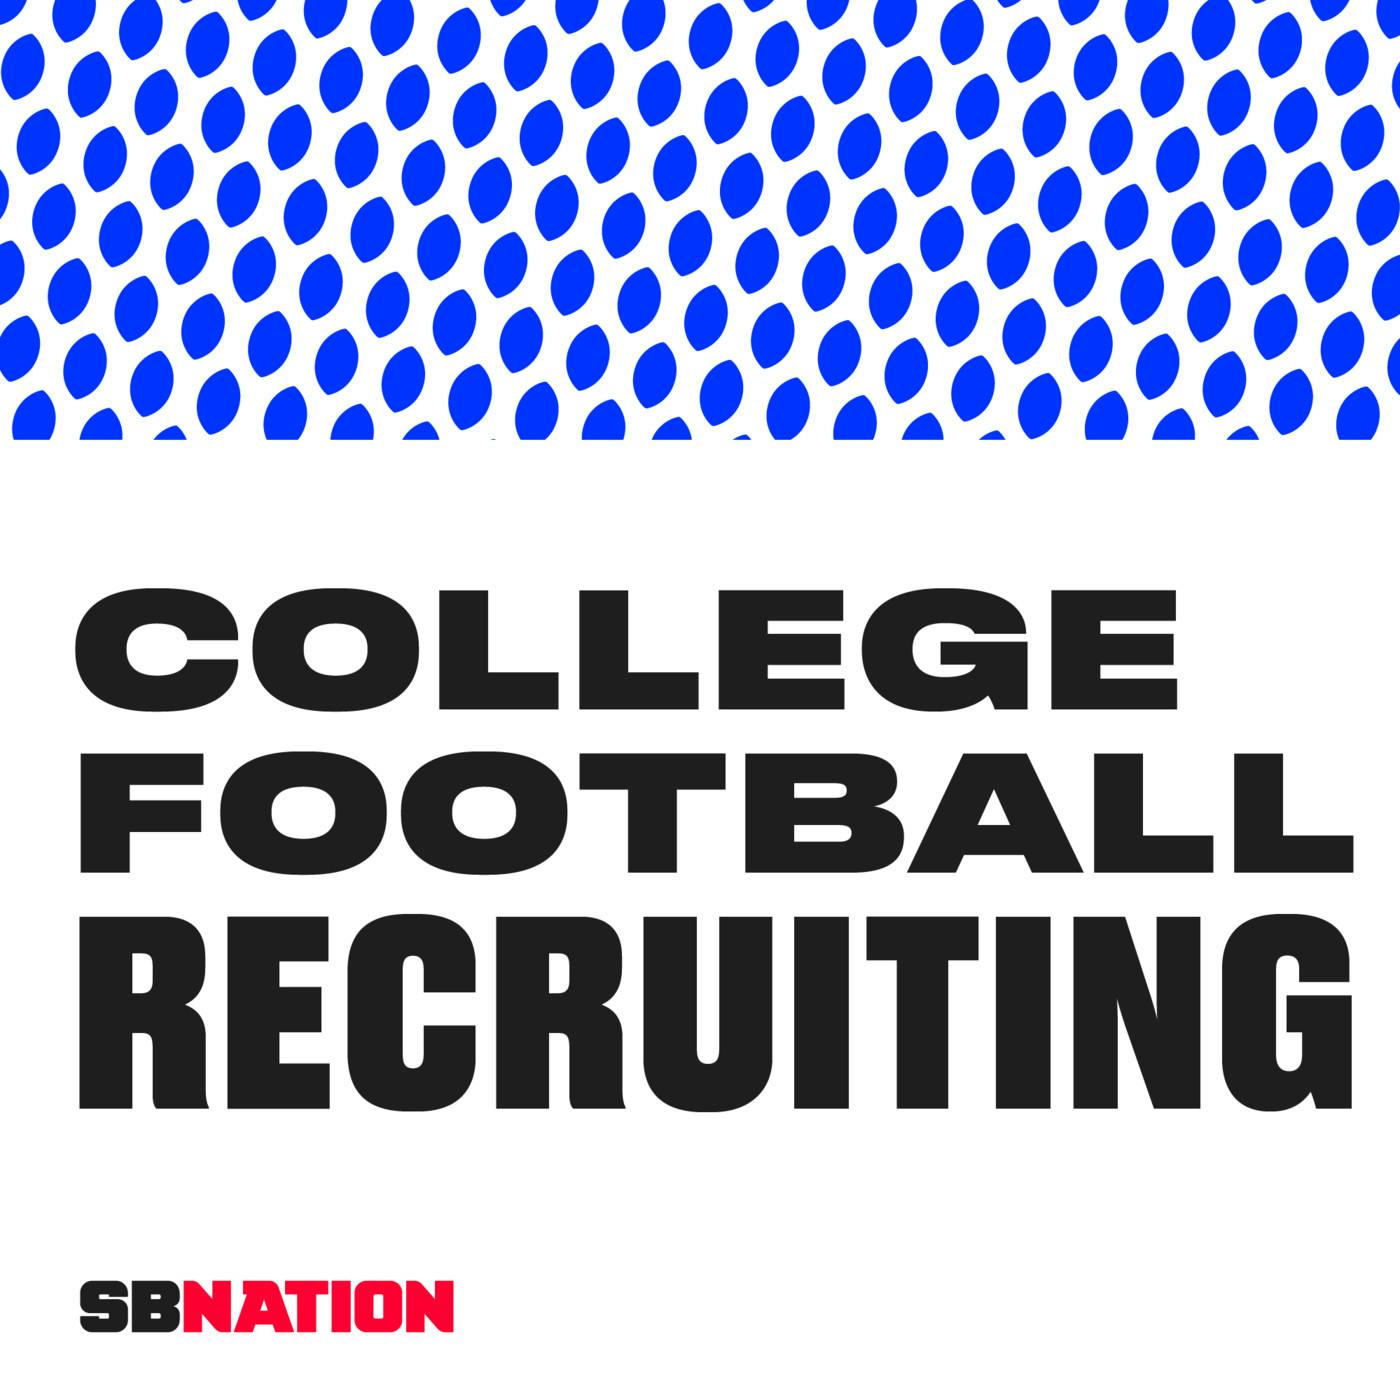 Who has recruited at a national title level?